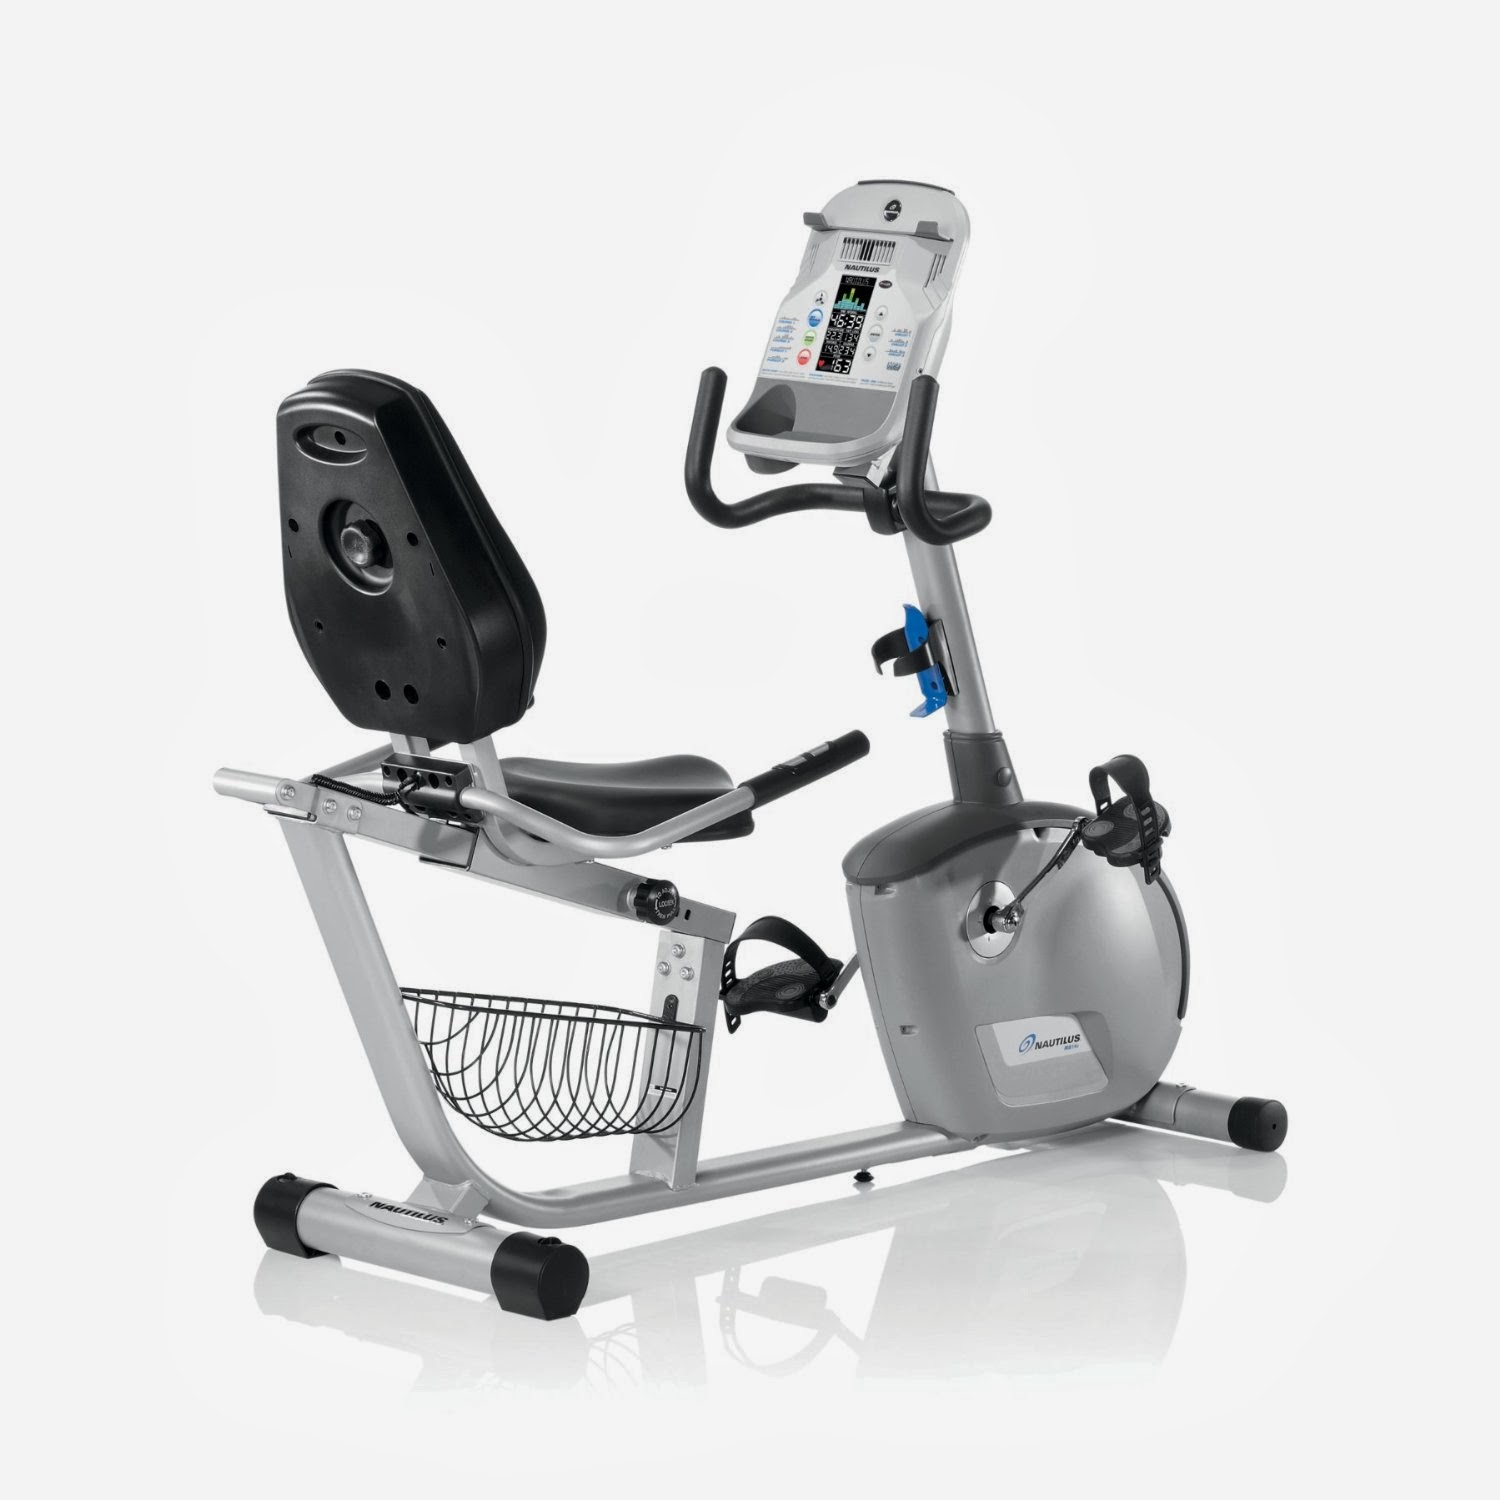 Nautilus R514c Recumbent Exercise Bike, review of features, highly spec & loads of programs & magnetic resistance